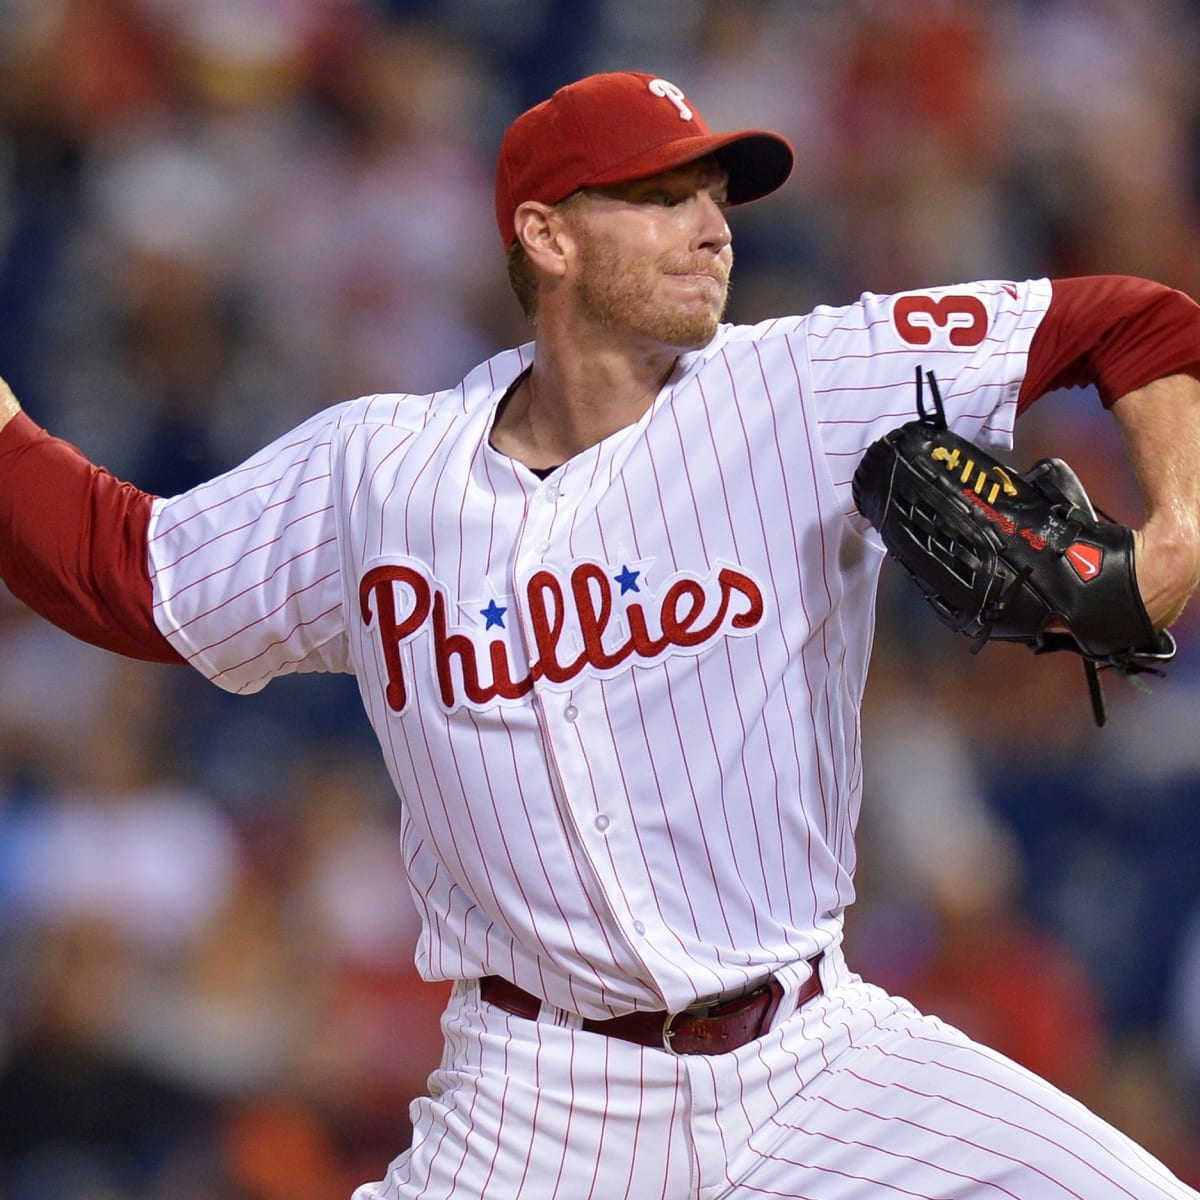 Roy Halladay's son will pitch against Blue Jays in spring training game